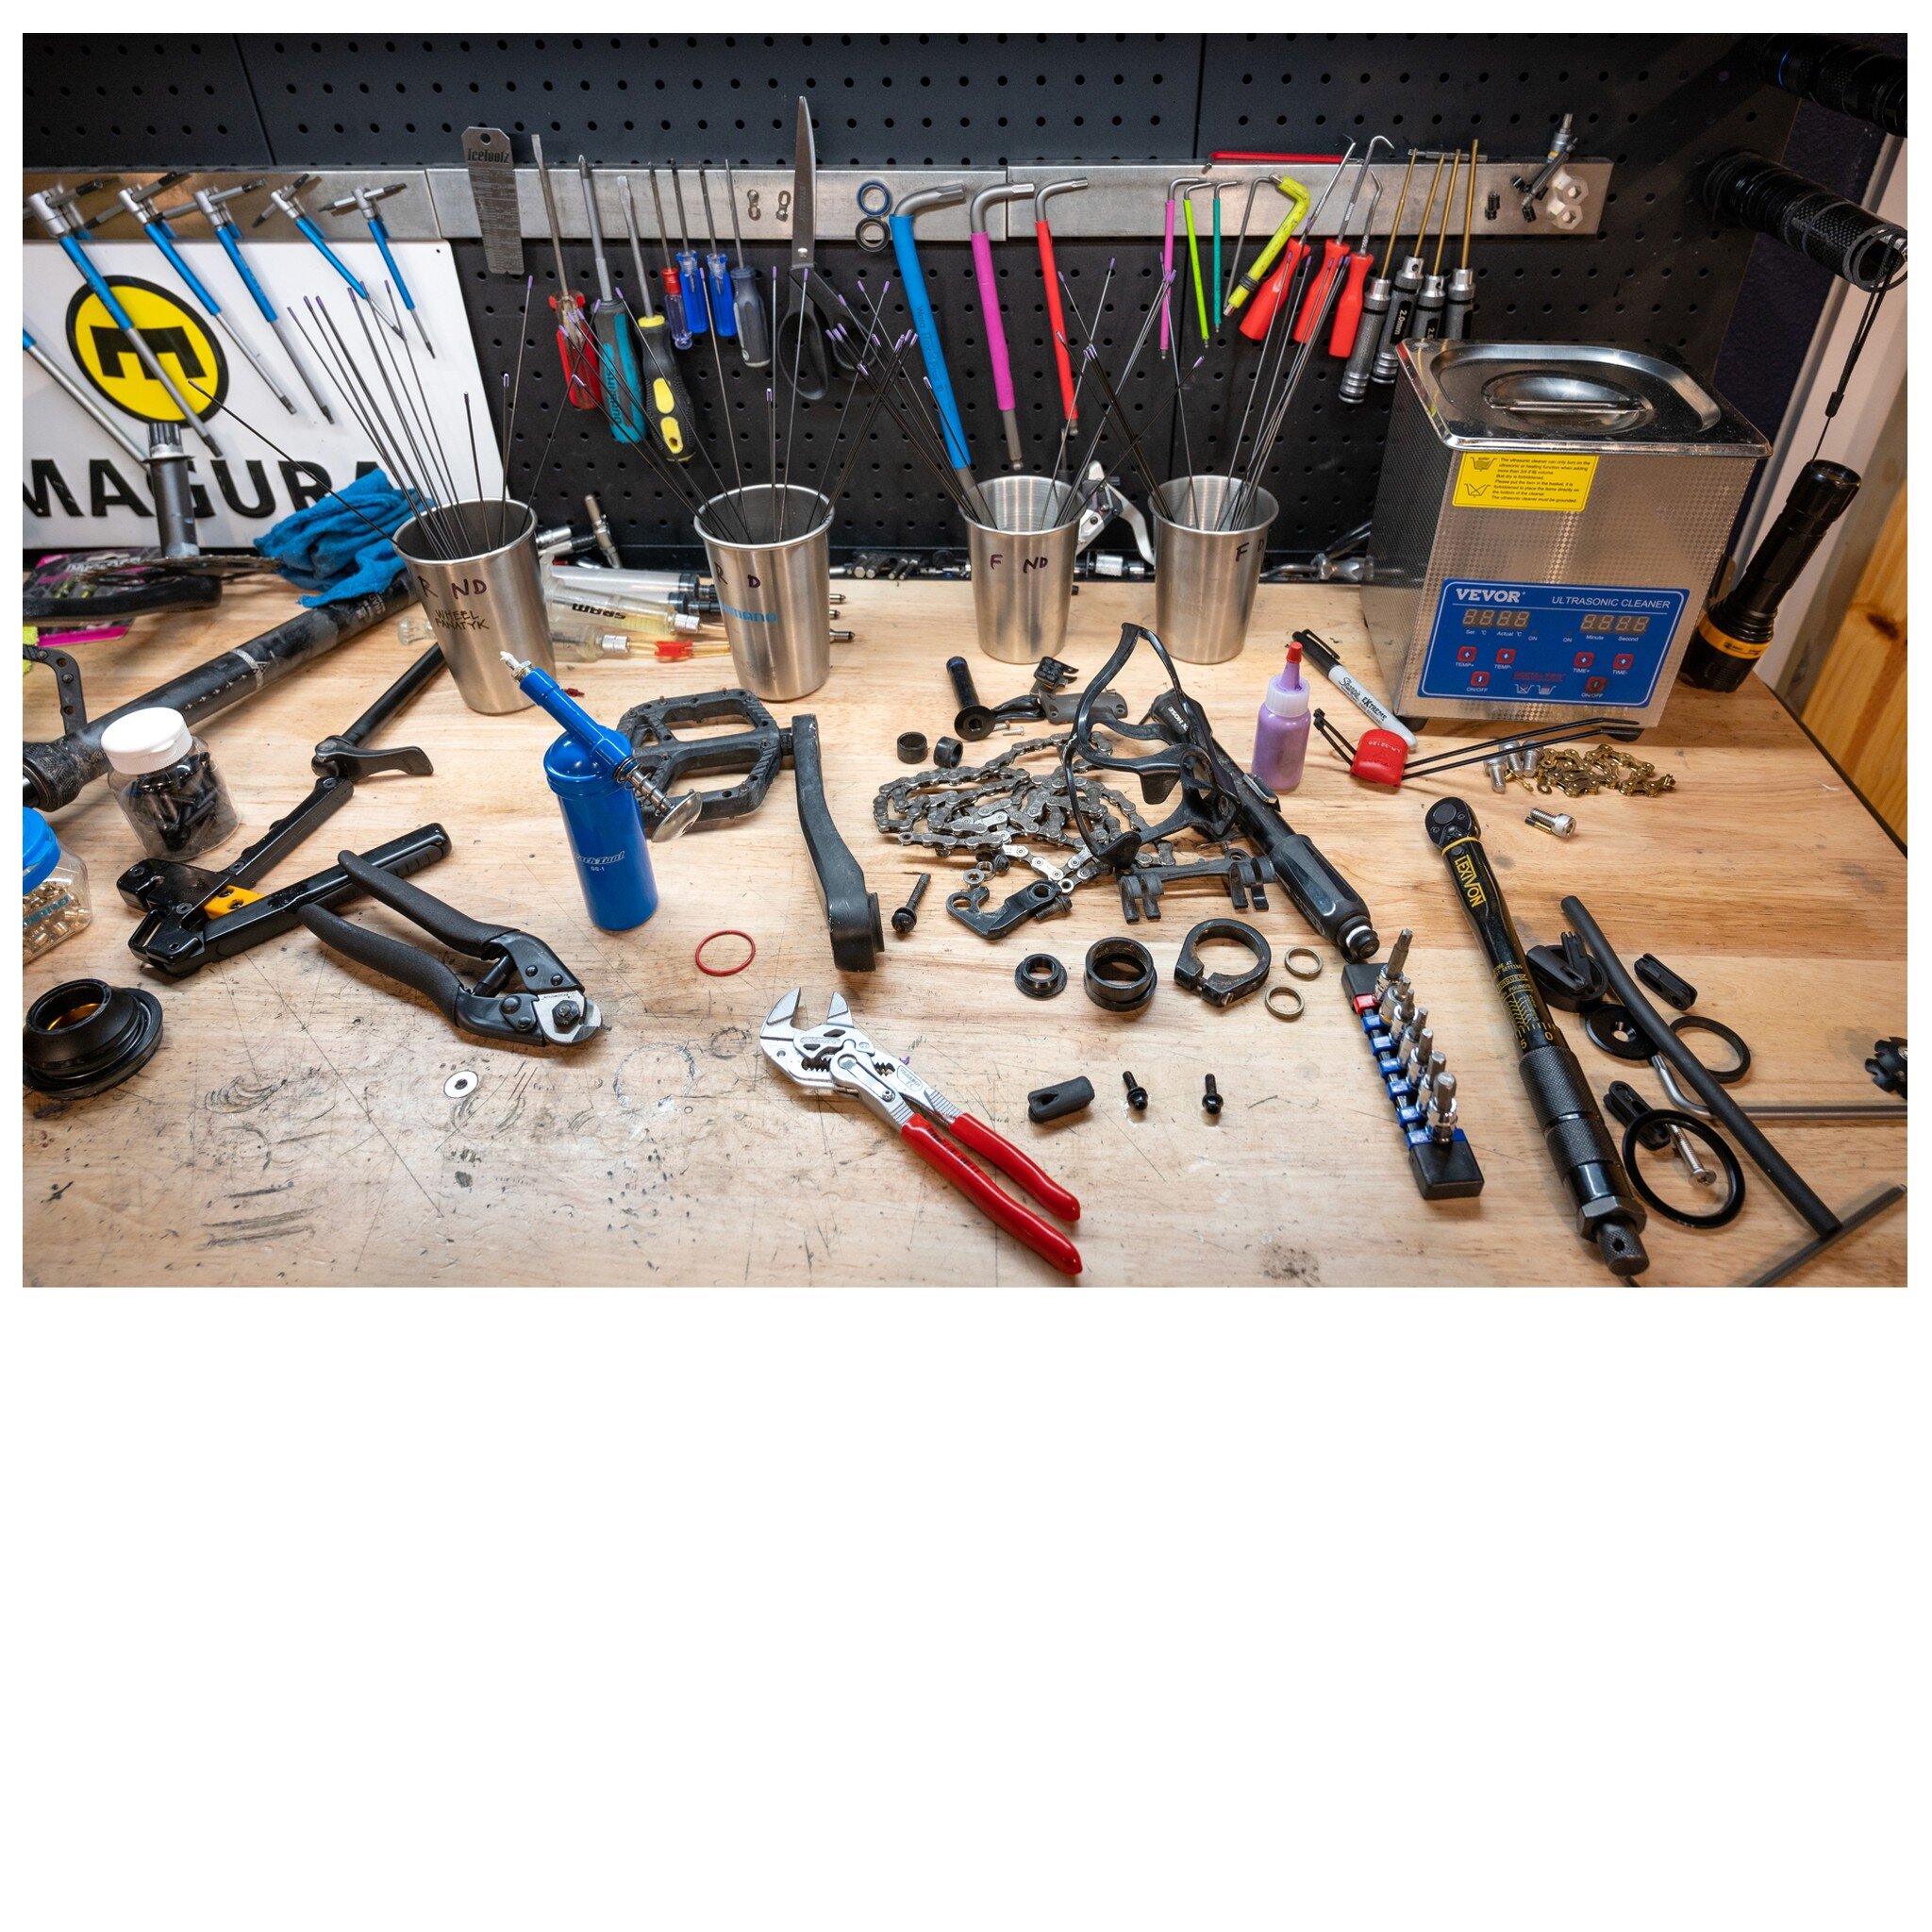 When James&rsquo; workbench gets like this, you know he&rsquo;s deep in it. 

With ⛈ in the forecast, now&rsquo;s a great time for bike maintenance. Visit our website to schedule an online appointment. Unless we need to order parts, you&rsquo;ll get 